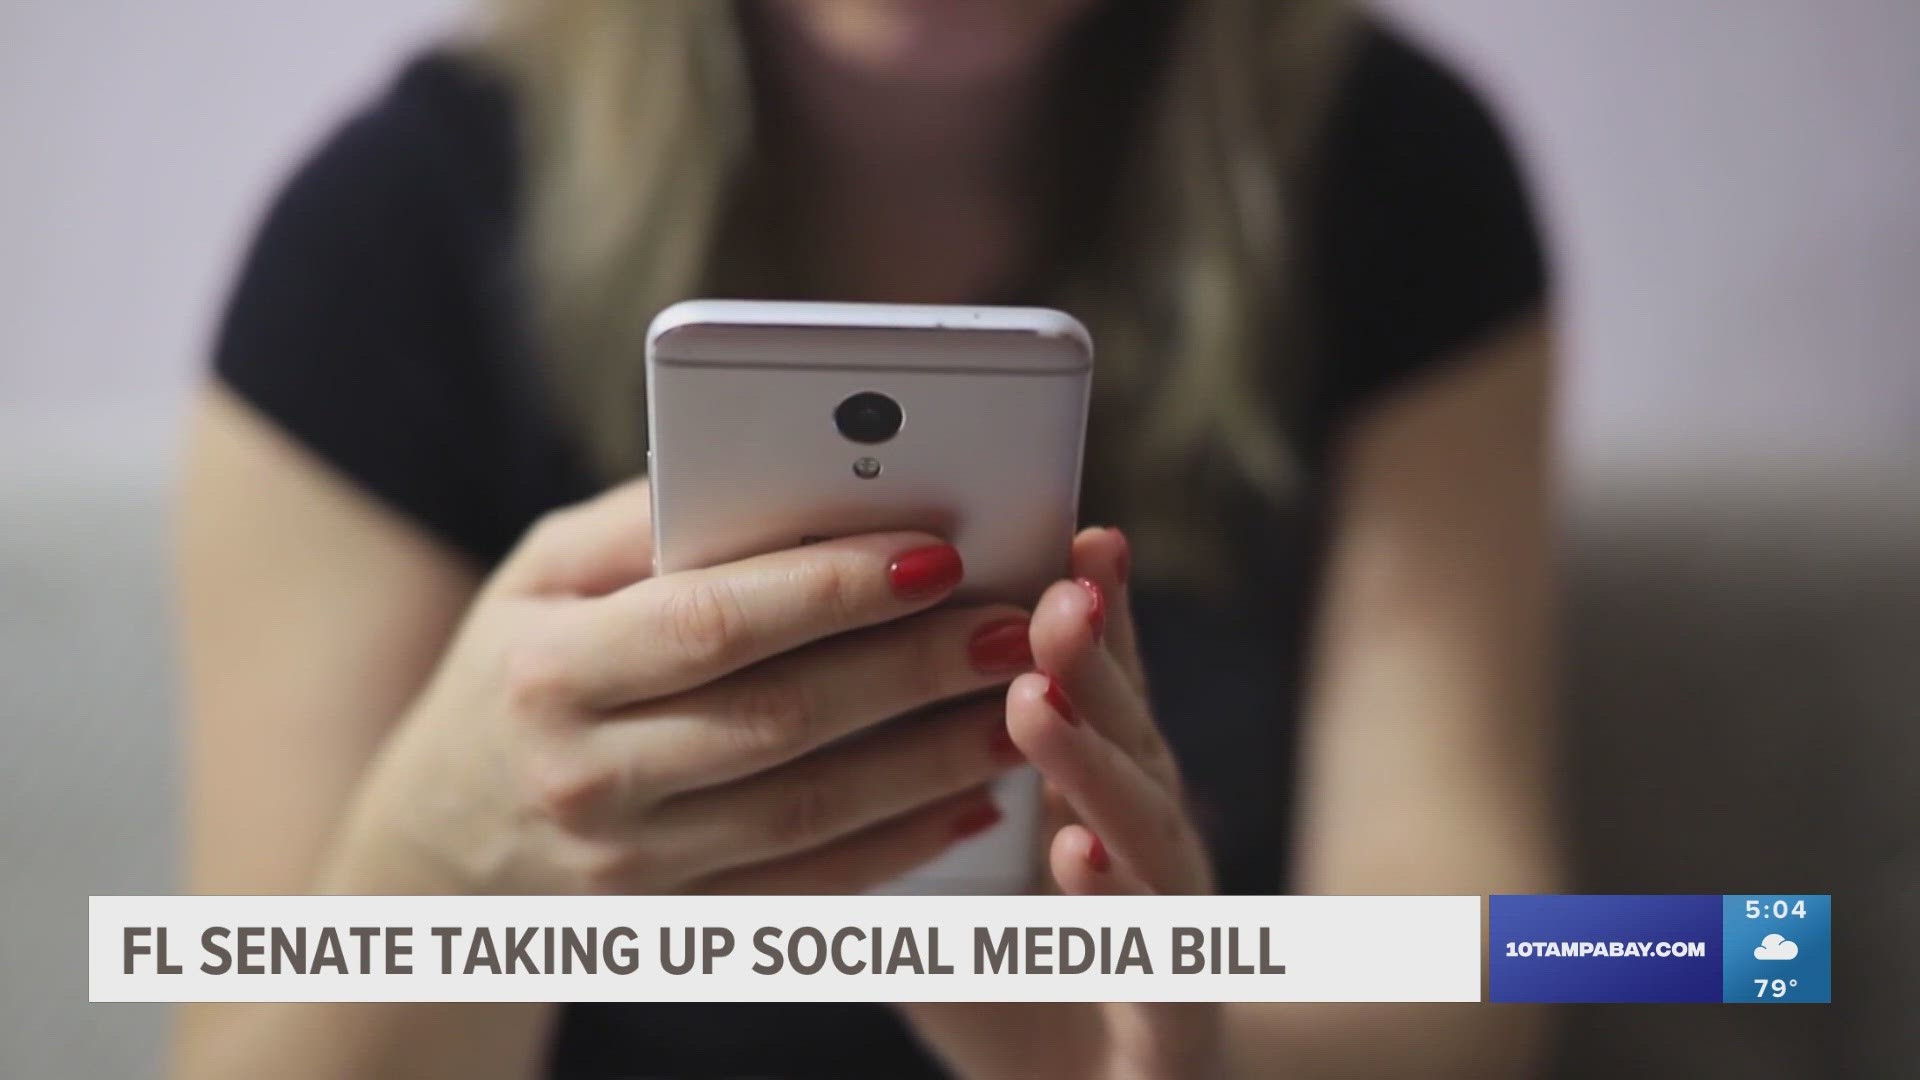 The bill doesn't list which platforms would be affected, but it targets any social media site that tracks user activity.